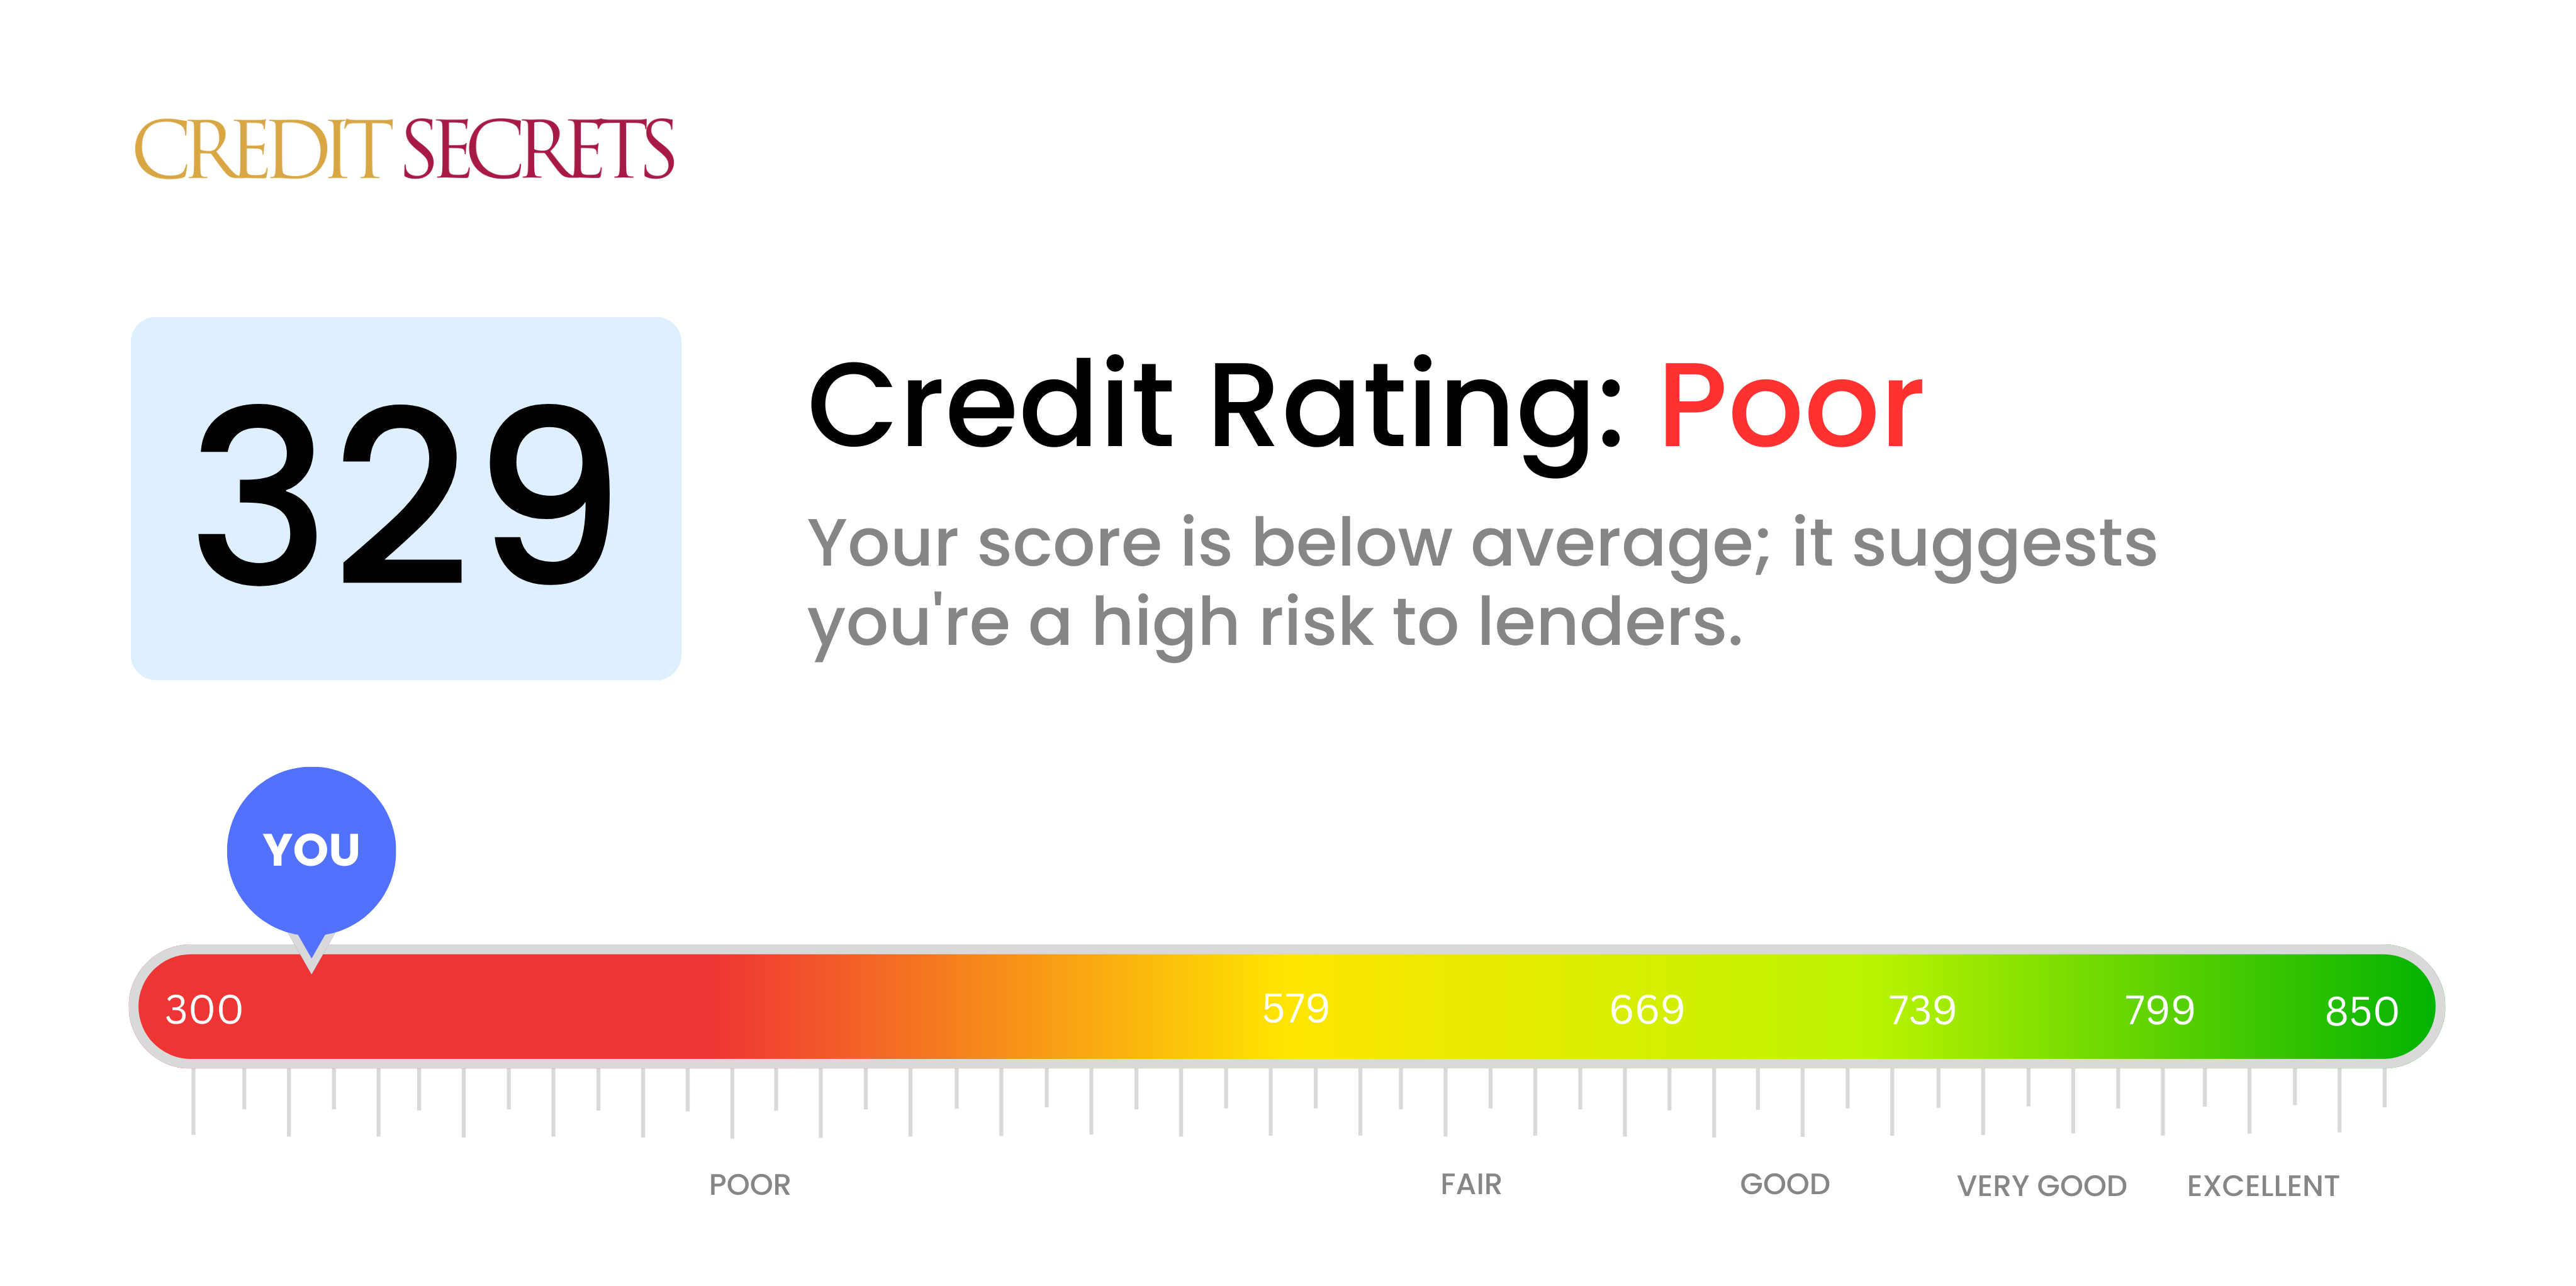 Is 329 a good credit score?